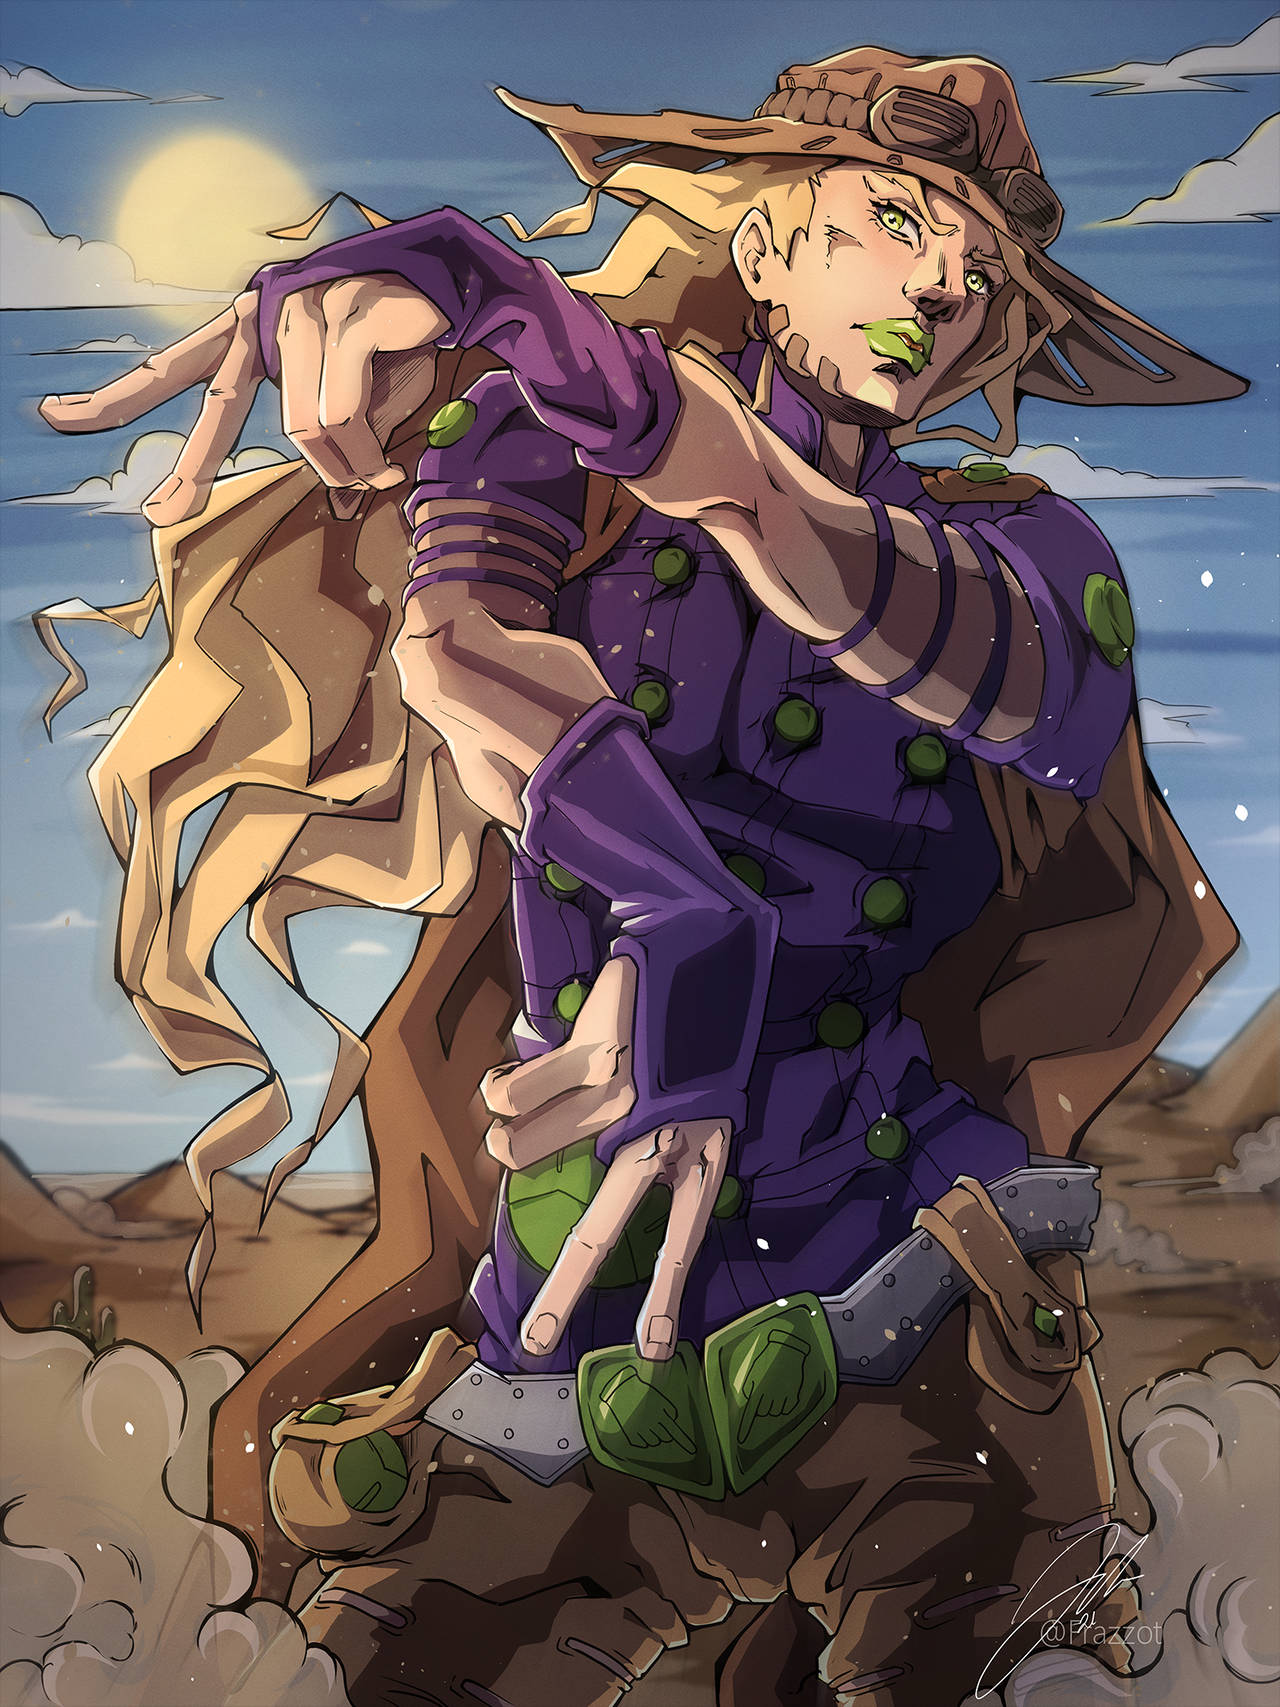 Gyro Zeppeli wallpaper by FEELQUEEN  Download on ZEDGE  a2ff